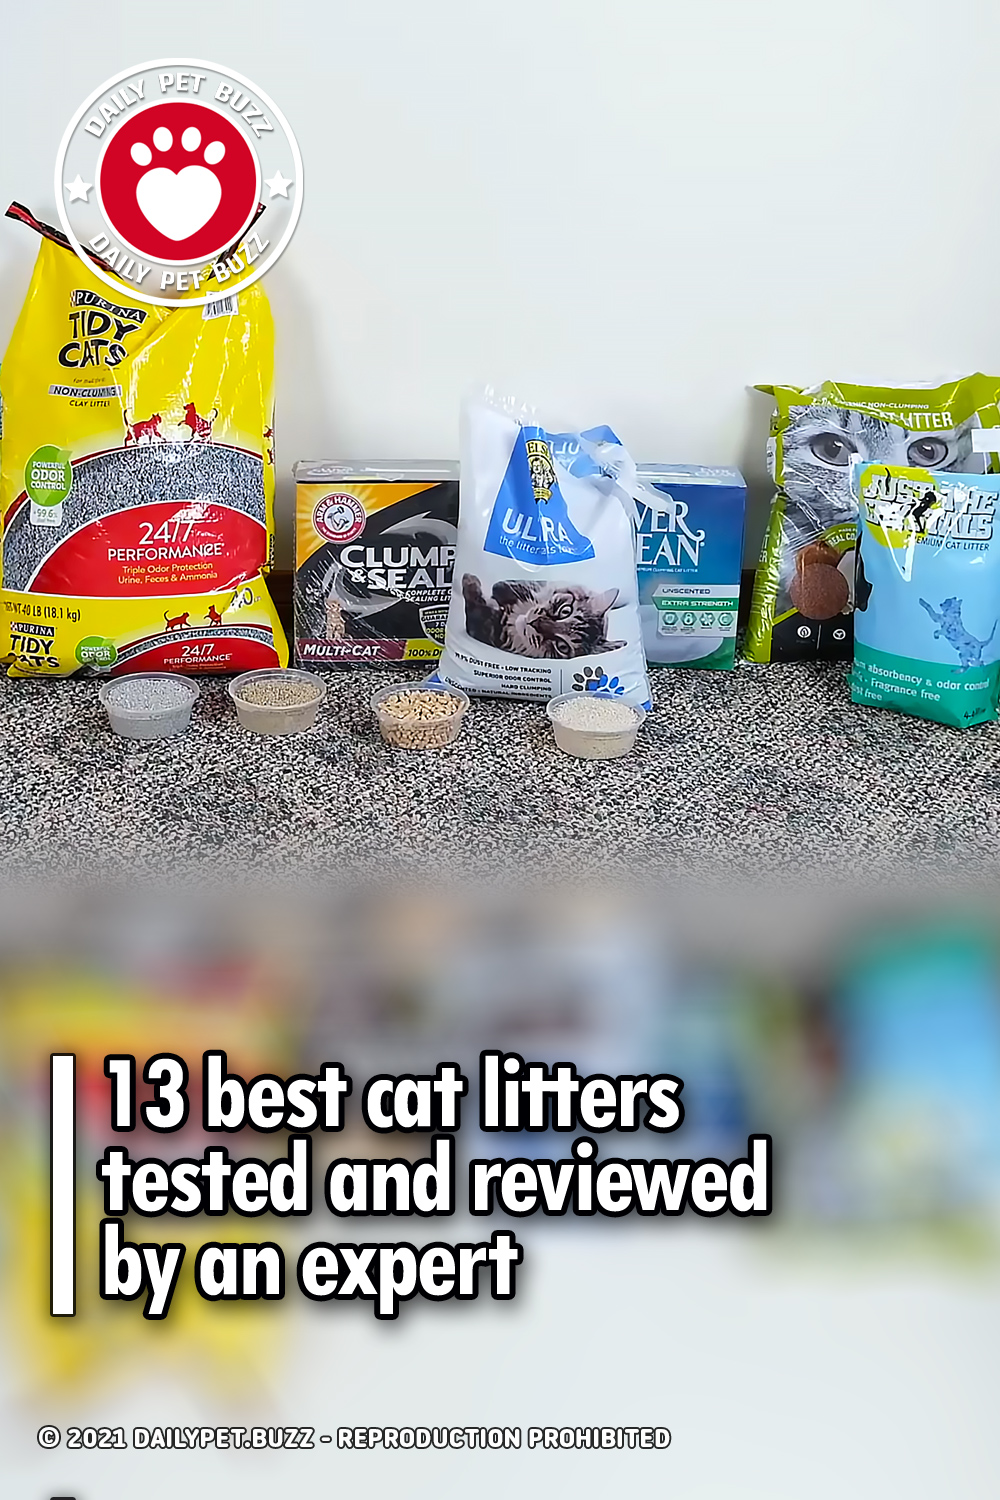 13 best cat litters tested and reviewed by an expert